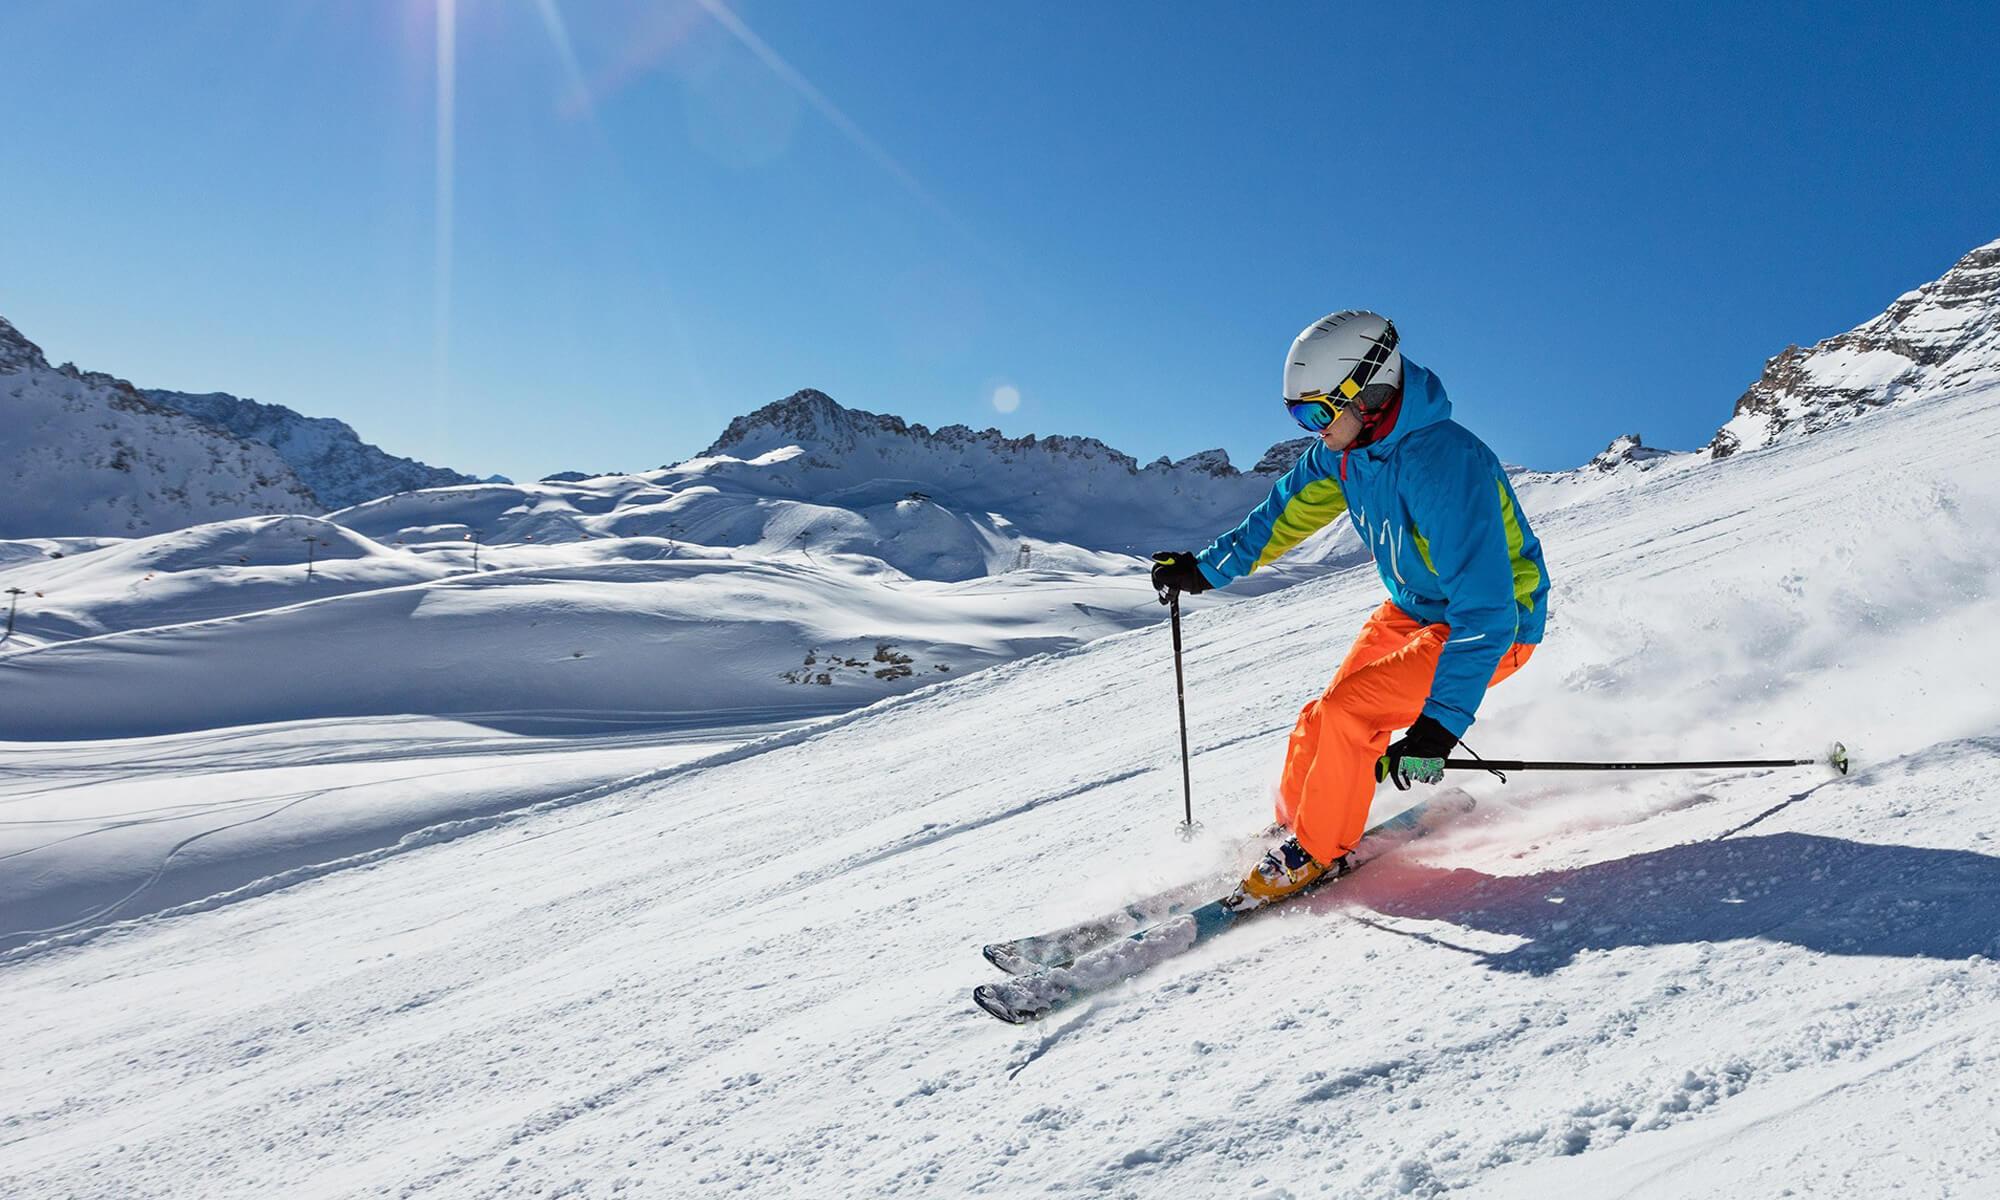 Get your snowboards, ski’s and winter gear ready for an unforgettable family holiday in Italy